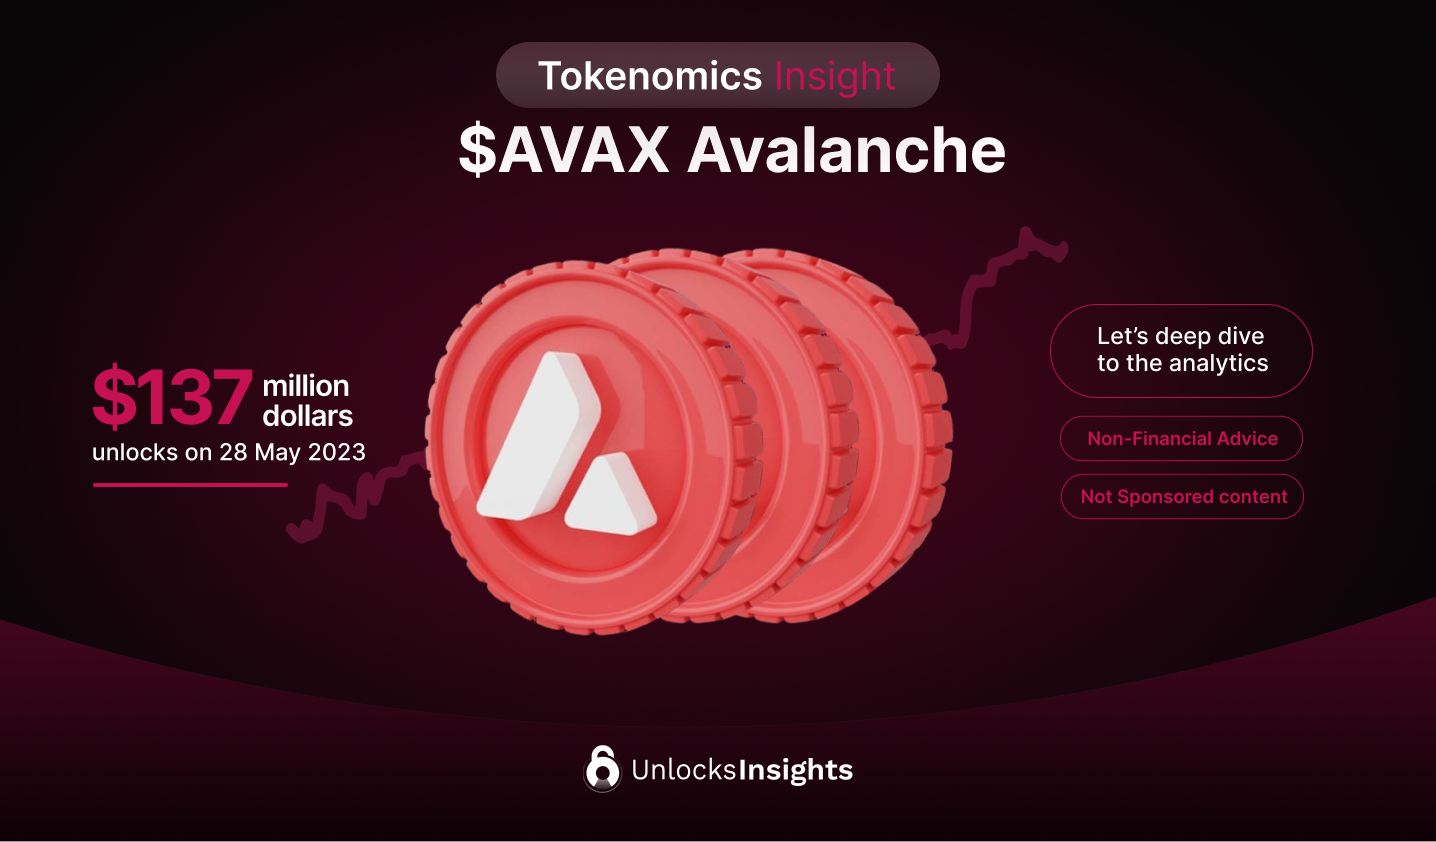 Avalanche: A Resilient Top 10 Blockchain Amid Market Challenges